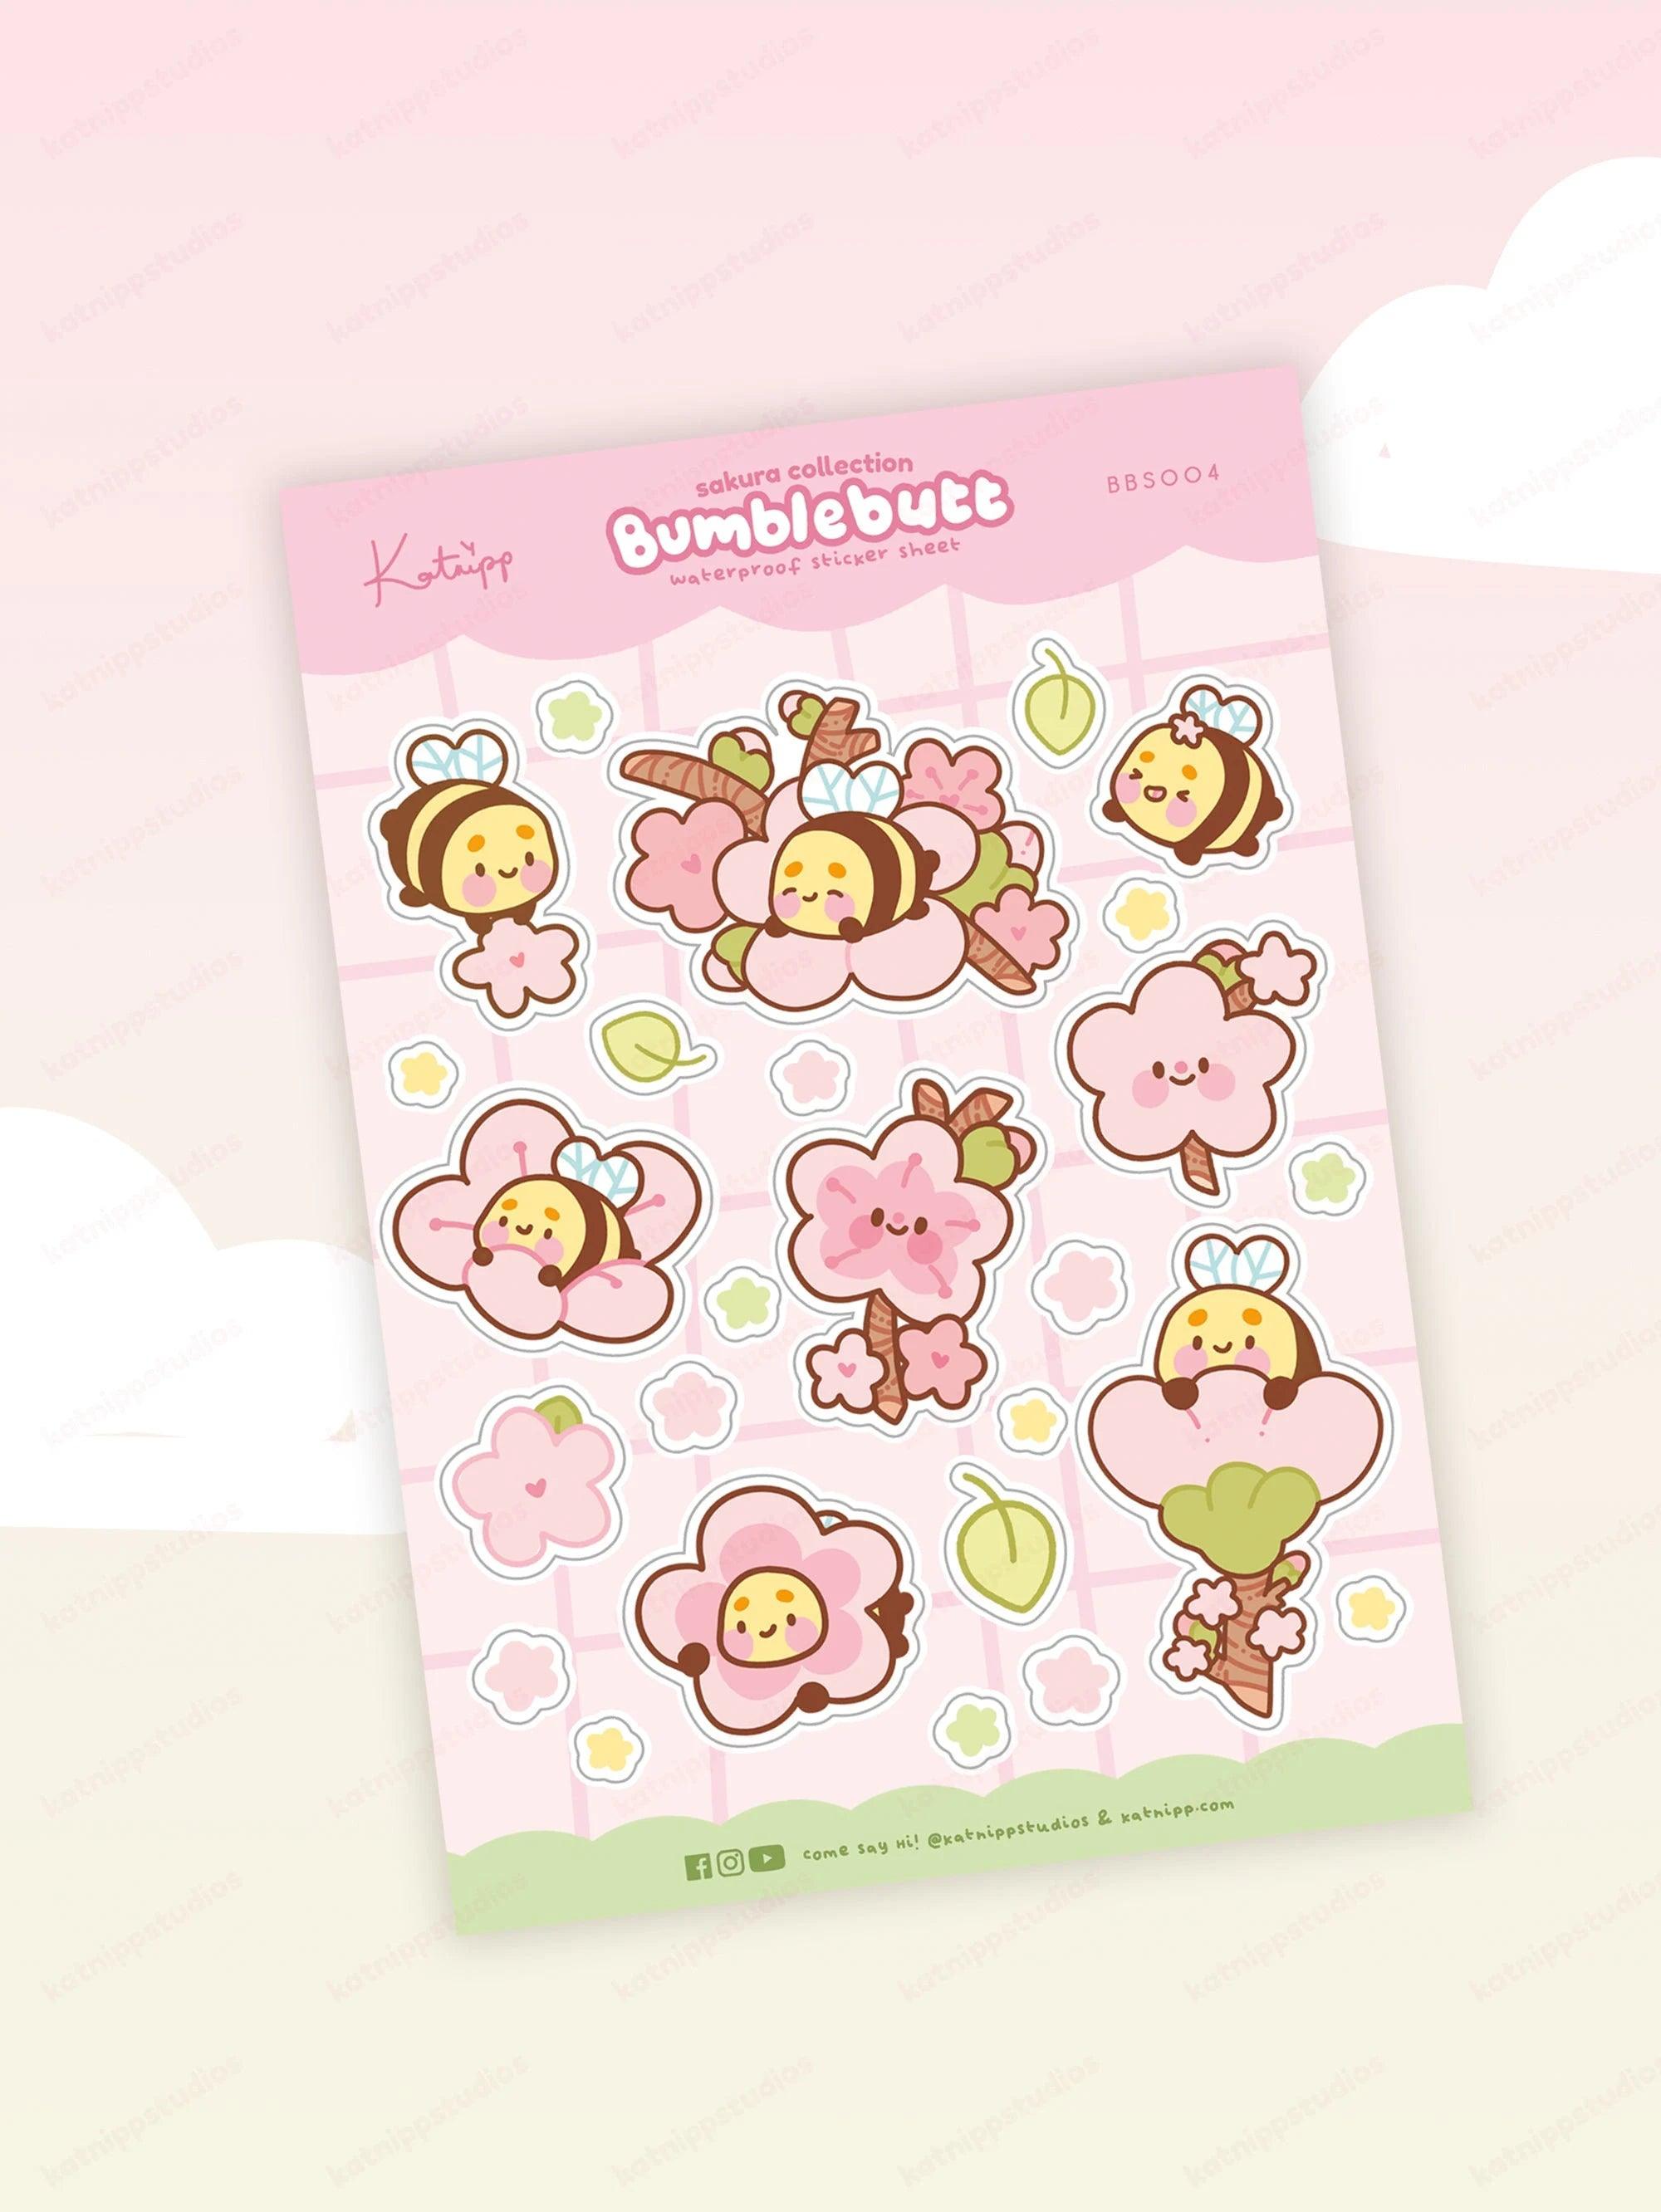 Bumblebutt Sakura A5 sticker sheet featuring cute bumblebee and cherry blossom designs. Waterproof vinyl stickers for planners, journals, and more, secondary